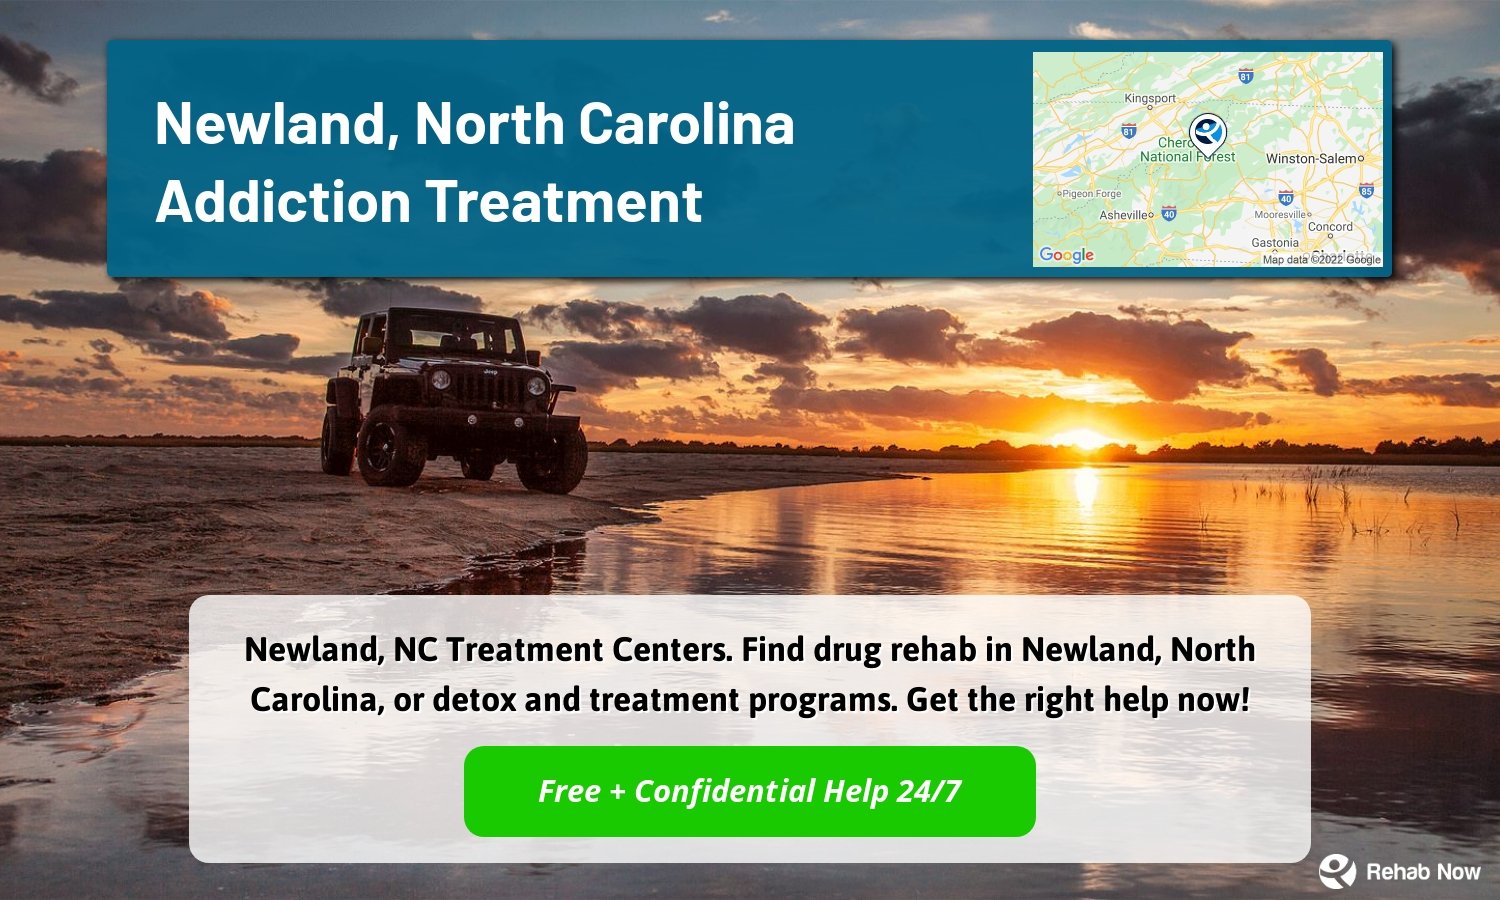 Newland, NC Treatment Centers. Find drug rehab in Newland, North Carolina, or detox and treatment programs. Get the right help now!